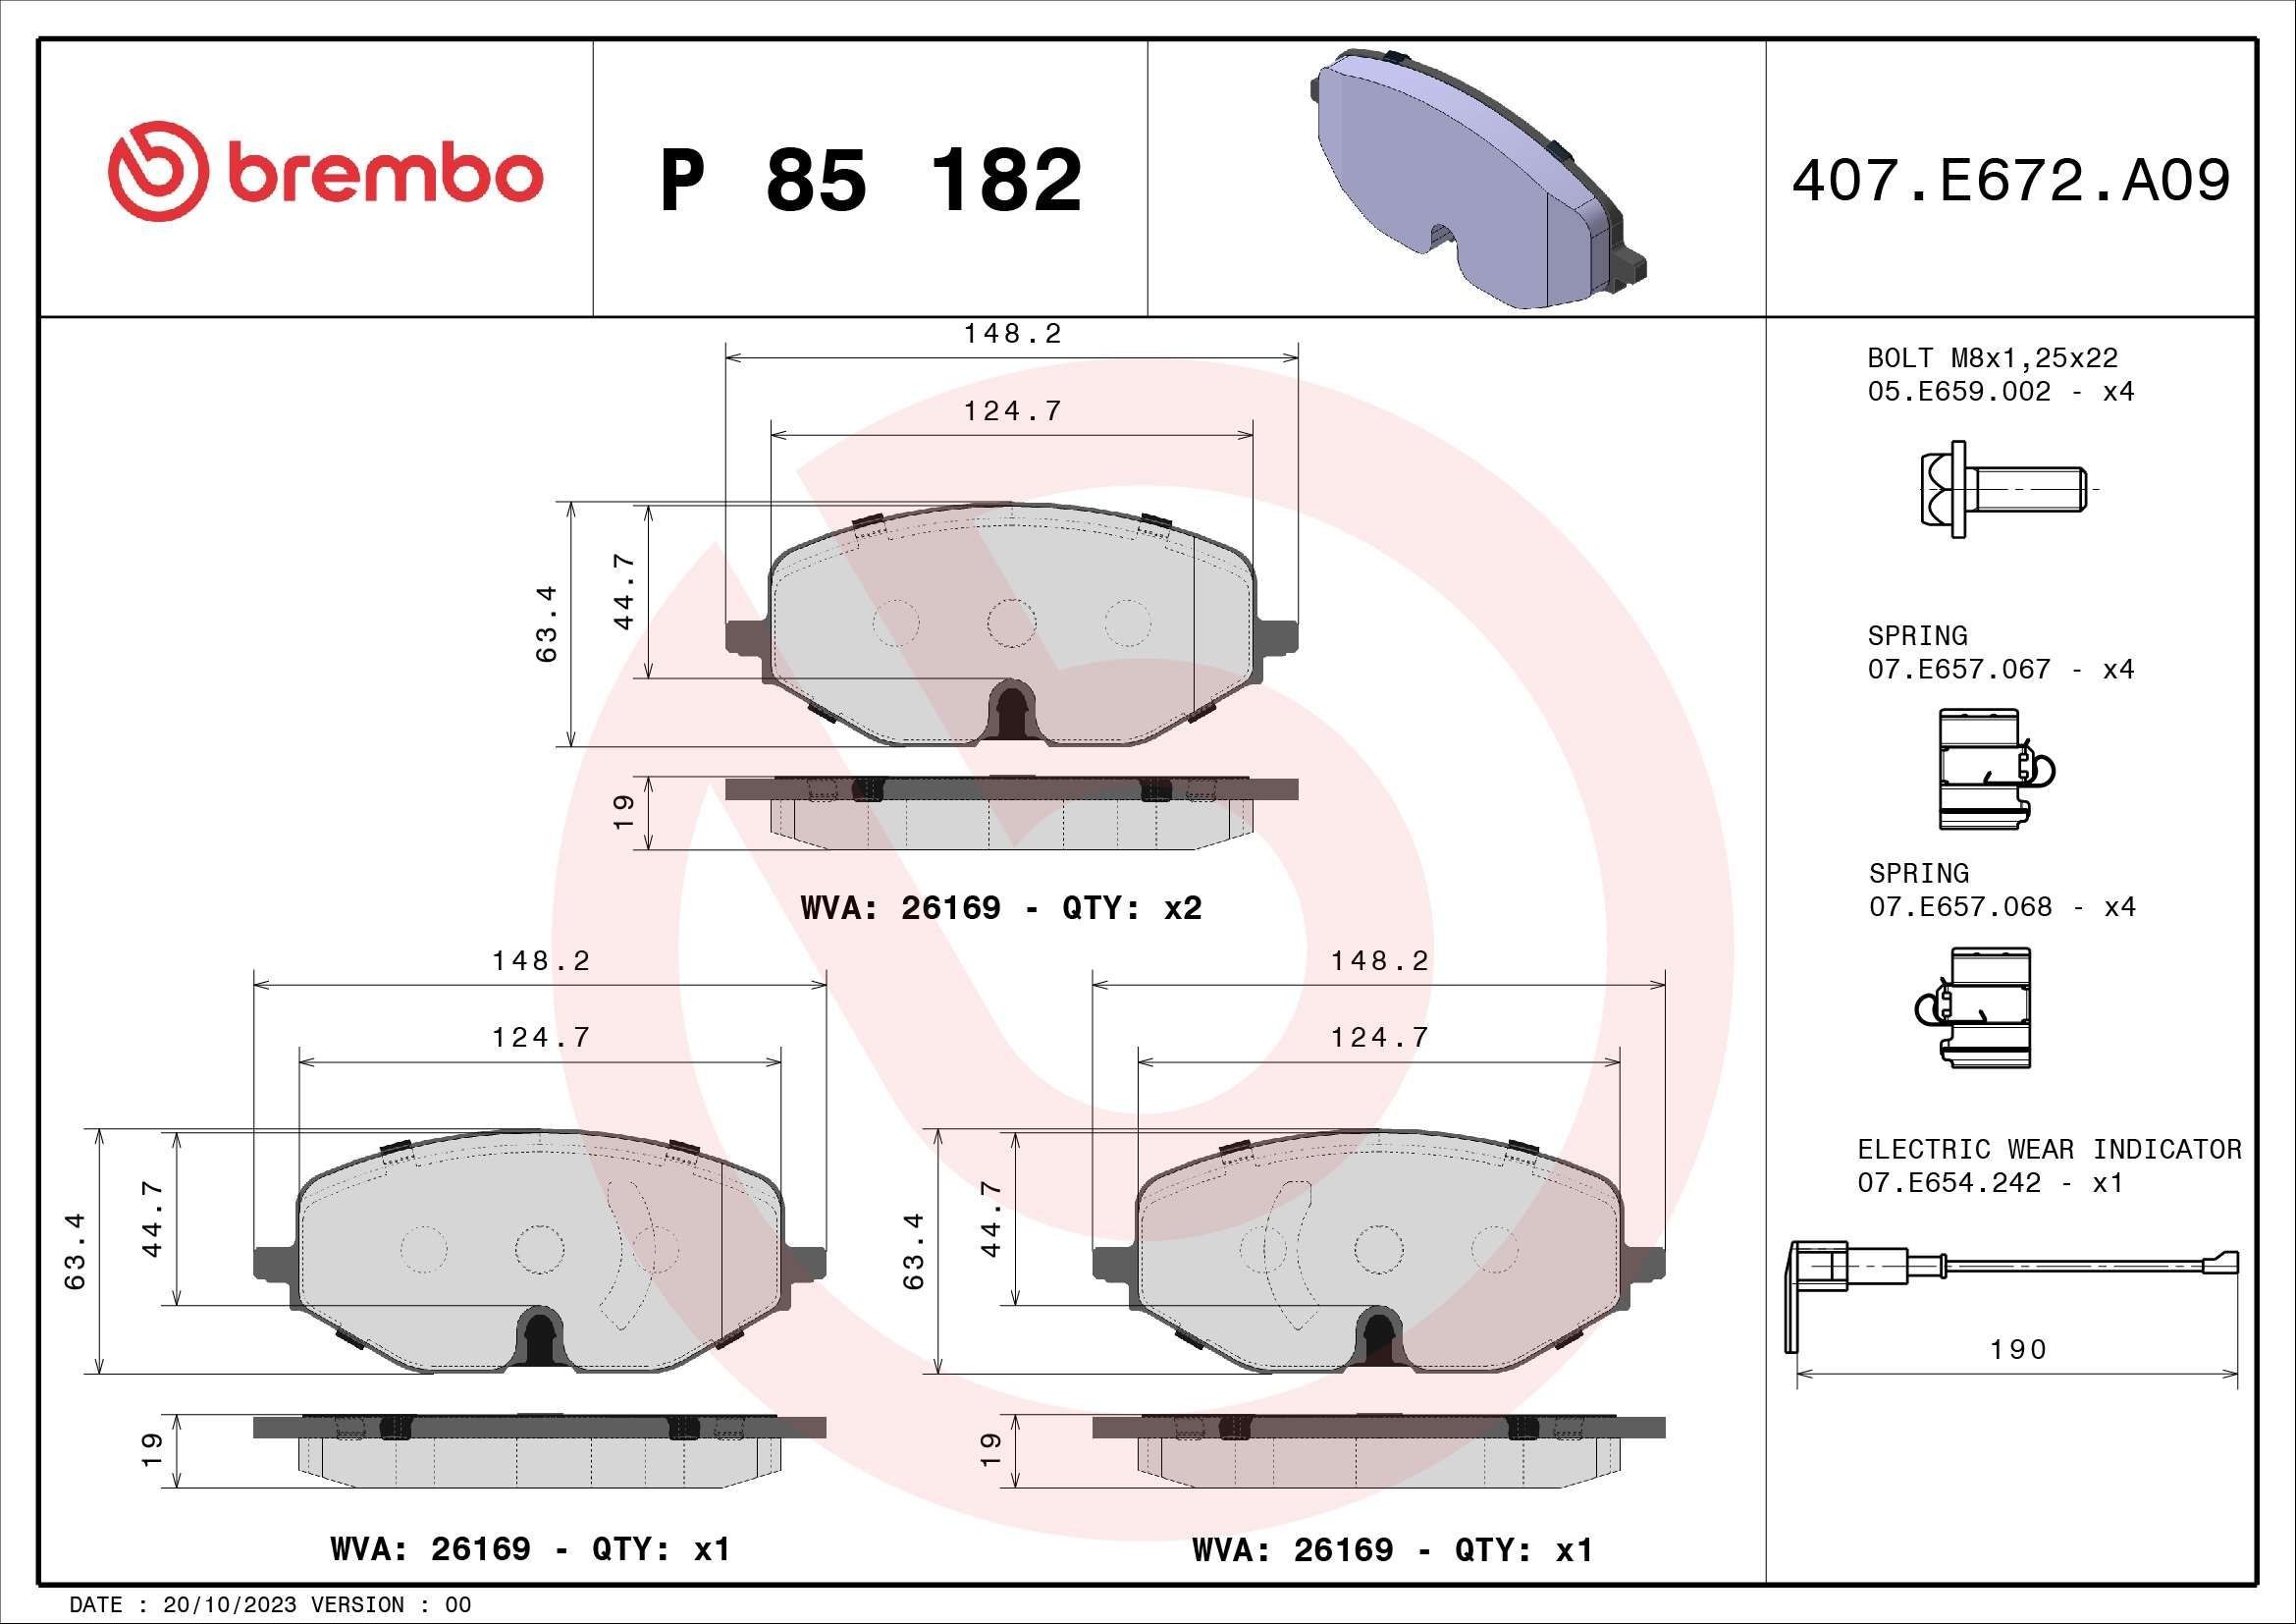 BREMBO Brake pad kit rear and front Golf VIII Variant new P 85 182